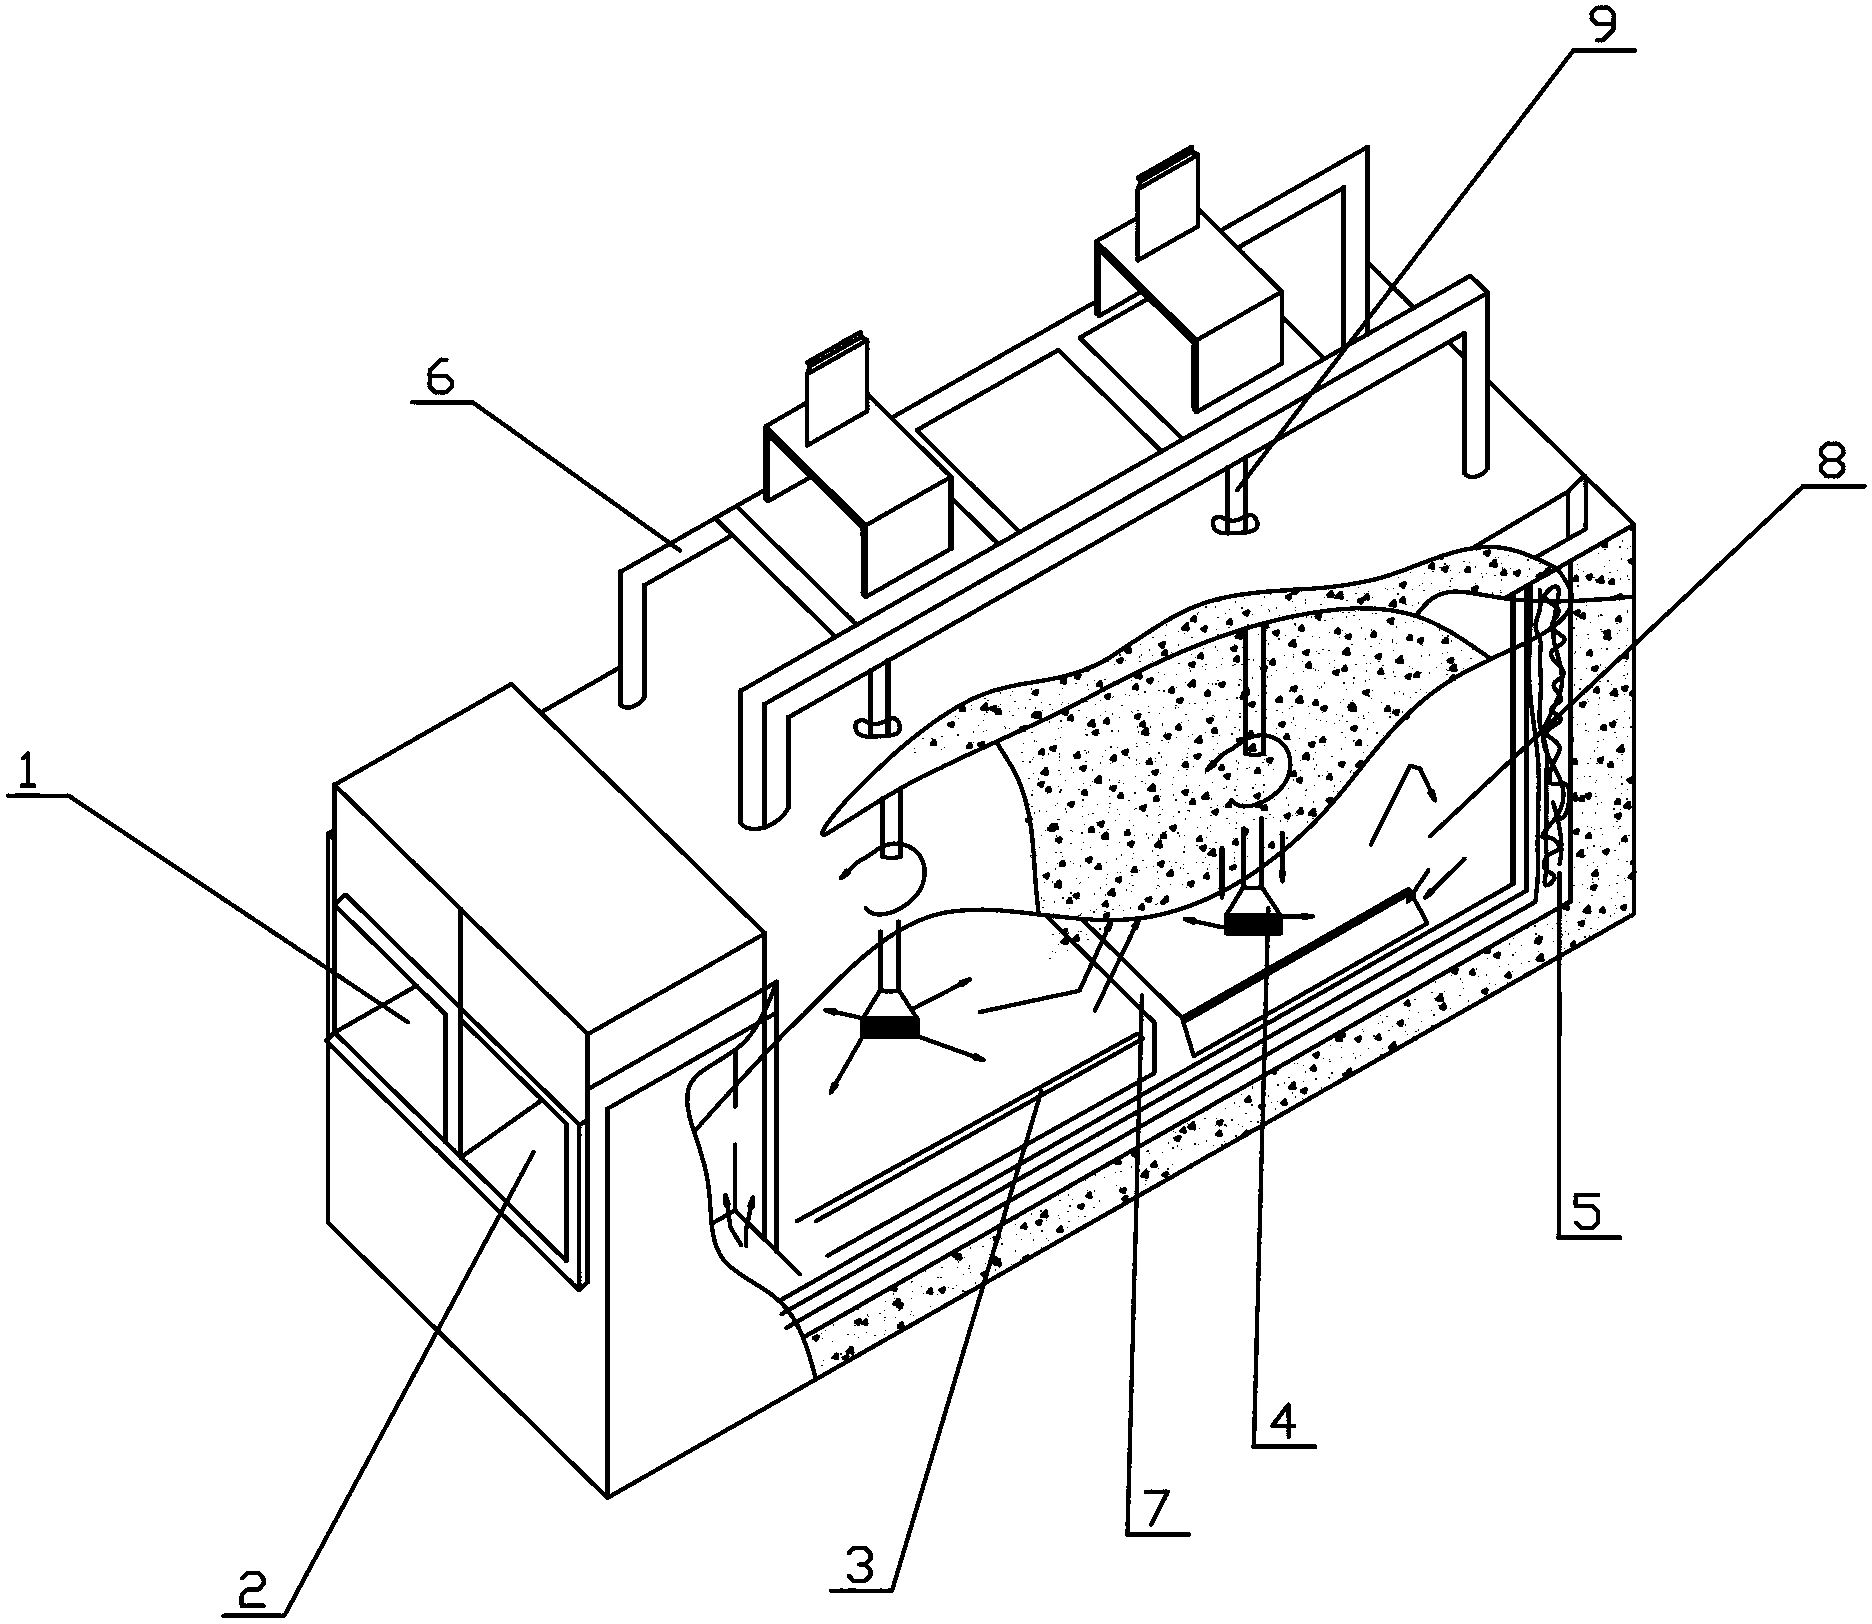 Out-of-furnace degassing device